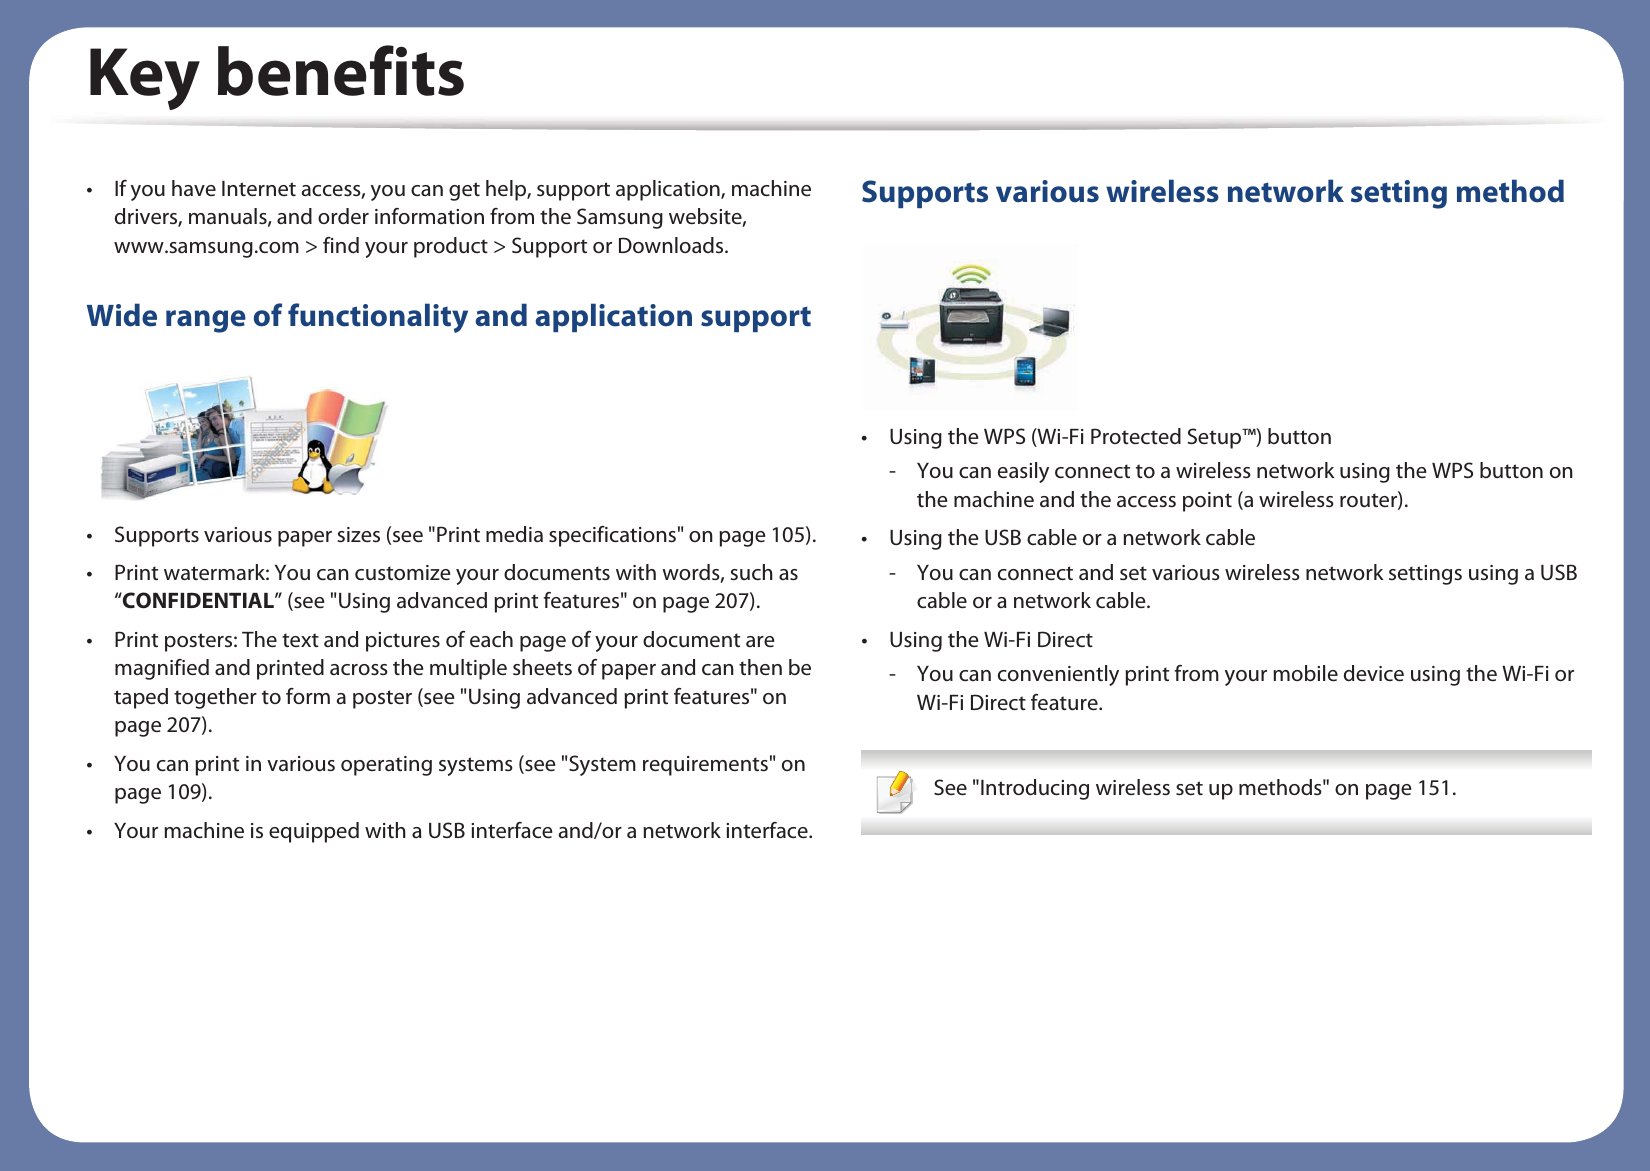 Key benefits• If you have Internet access, you can get help, support application, machine drivers, manuals, and order information from the Samsung website, www.samsung.com &gt; find your product &gt; Support or Downloads.Wide range of functionality and application support• Supports various paper sizes (see &quot;Print media specifications&quot; on page 105).• Print watermark: You can customize your documents with words, such as “CONFIDENTIAL” (see &quot;Using advanced print features&quot; on page 207).• Print posters: The text and pictures of each page of your document are magnified and printed across the multiple sheets of paper and can then be taped together to form a poster (see &quot;Using advanced print features&quot; on page 207).• You can print in various operating systems (see &quot;System requirements&quot; on page 109).• Your machine is equipped with a USB interface and/or a network interface.Supports various wireless network setting method • Using the WPS (Wi-Fi Protected Setup™) button- You can easily connect to a wireless network using the WPS button on the machine and the access point (a wireless router).• Using the USB cable or a network cable- You can connect and set various wireless network settings using a USB cable or a network cable.• Using the Wi-Fi Direct- You can conveniently print from your mobile device using the Wi-Fi or Wi-Fi Direct feature. See &quot;Introducing wireless set up methods&quot; on page 151. 